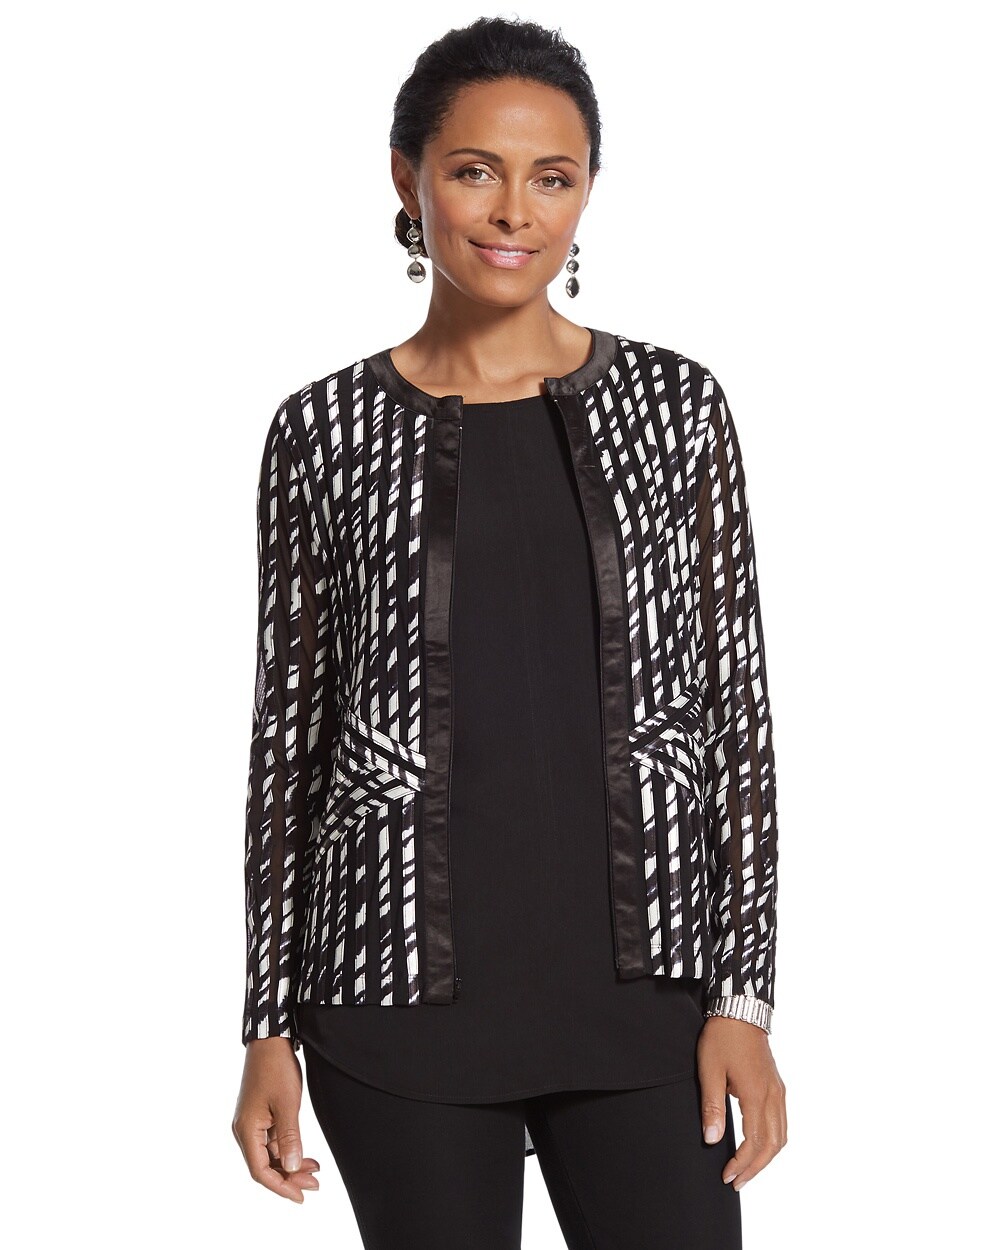 Allure Black-and-White Jacket